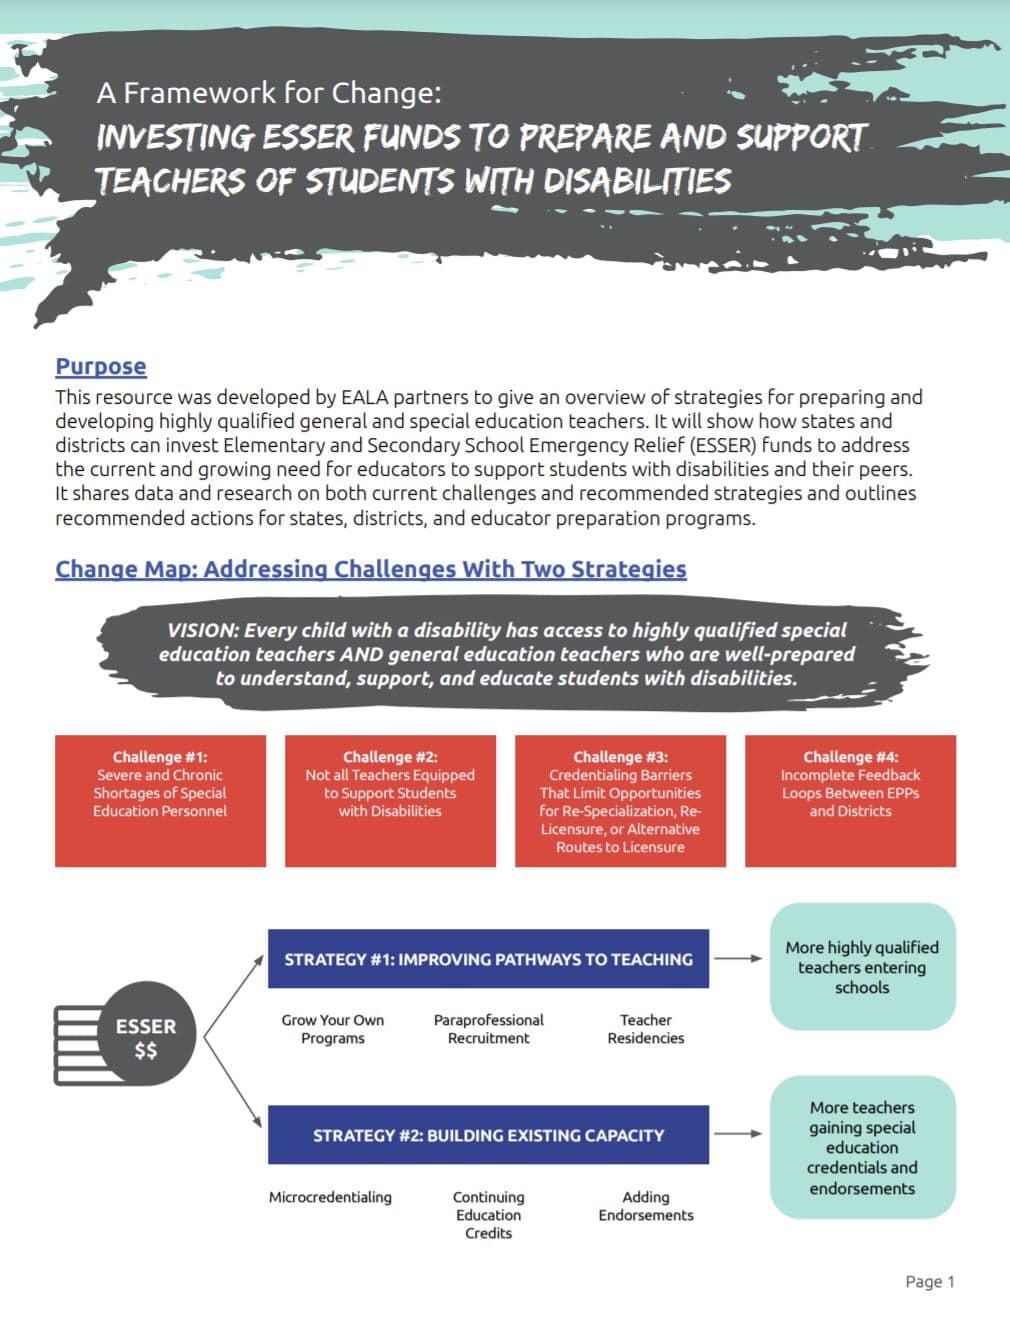 A Framework for Change: Investing ESSER Funds to Prepare and Support Teachers of Students With Disabilities.